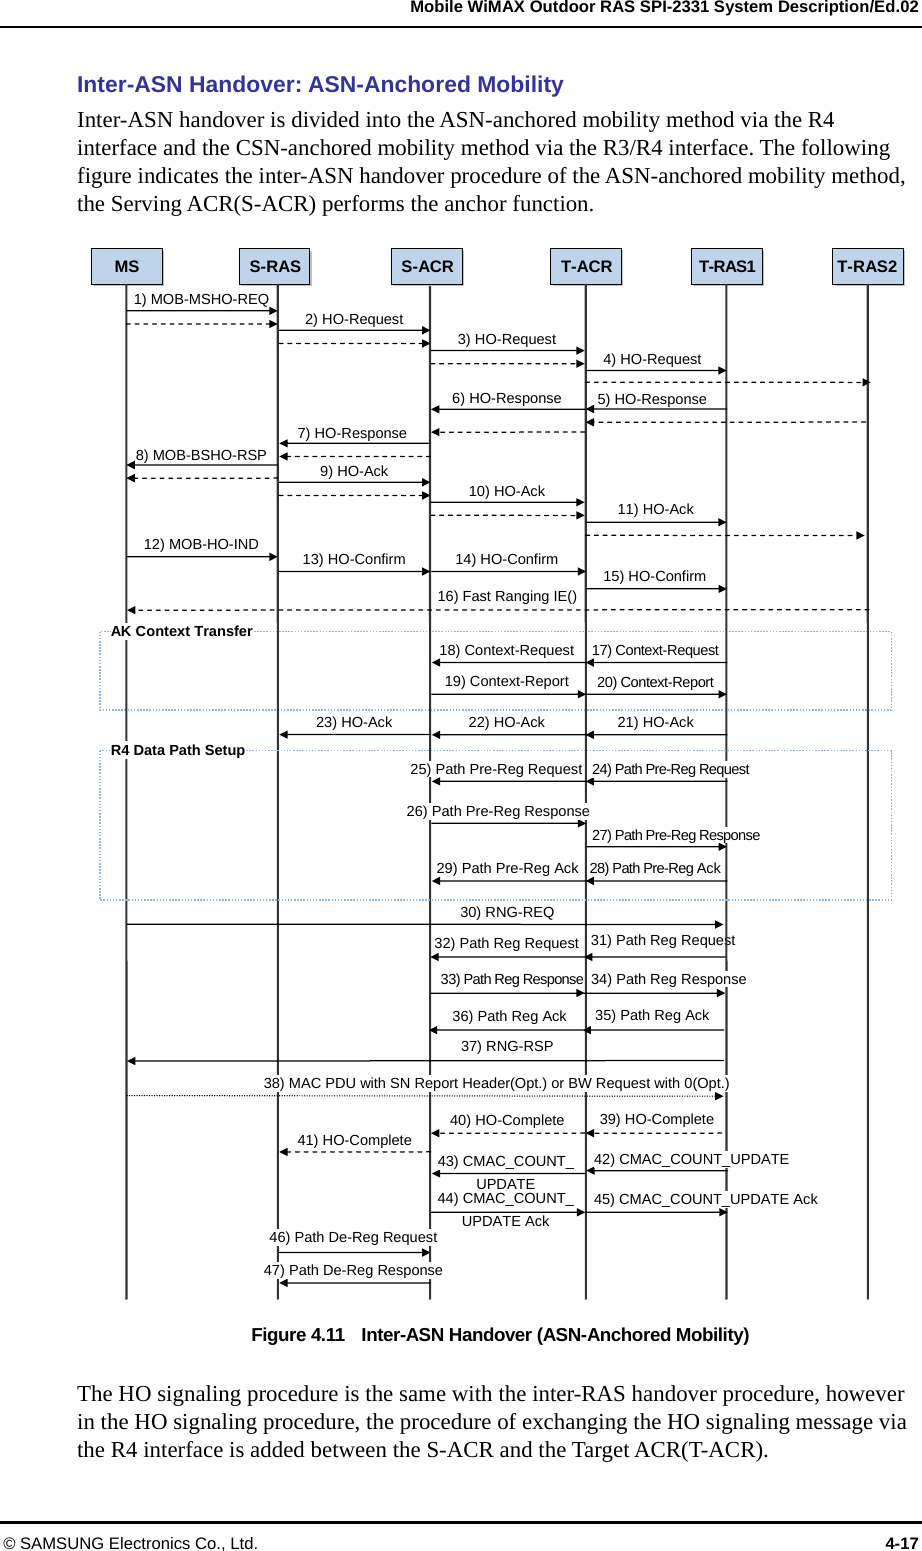   Mobile WiMAX Outdoor RAS SPI-2331 System Description/Ed.02 © SAMSUNG Electronics Co., Ltd.  4-17 Inter-ASN Handover: ASN-Anchored Mobility Inter-ASN handover is divided into the ASN-anchored mobility method via the R4 interface and the CSN-anchored mobility method via the R3/R4 interface. The following figure indicates the inter-ASN handover procedure of the ASN-anchored mobility method, the Serving ACR(S-ACR) performs the anchor function.  Figure 4.11   Inter-ASN Handover (ASN-Anchored Mobility)  The HO signaling procedure is the same with the inter-RAS handover procedure, however in the HO signaling procedure, the procedure of exchanging the HO signaling message via the R4 interface is added between the S-ACR and the Target ACR(T-ACR).   35) Path Reg Ack 33) Path Reg Response 31) Path Reg Request MS  S-RAS  T-ACR T-RAS1  T-RAS21) MOB-MSHO-REQ S-ACRAK Context Transfer 2) HO-Request 3) HO-Request 4) HO-Request 5) HO-Response 6) HO-Response7) HO-Response8) MOB-BSHO-RSP  9) HO-Ack 10) HO-Ack 11) HO-Ack 12) MOB-HO-IND  13) HO-Confirm  14) HO-Confirm  15) HO-Confirm 18) Context-Request 17) Context-Request 19) Context-Report 20) Context-Report 22) HO-Ack  21) HO-Ack 23) HO-Ack R4 Data Path Setup 25) Path Pre-Reg Request 24) Path Pre-Reg Request 26) Path Pre-Reg Response27) Path Pre-Reg Response 29) Path Pre-Reg Ack 28) Path Pre-Reg Ack 16) Fast Ranging IE()30) RNG-REQ 37) RNG-RSP 38) MAC PDU with SN Report Header(Opt.) or BW Request with 0(Opt.) 40) HO-Complete  39) HO-Complete 41) HO-Complete 46) Path De-Reg Request47) Path De-Reg Response42) CMAC_COUNT_UPDATE 45) CMAC_COUNT_UPDATE Ack 43) CMAC_COUNT_UPDATE 44) CMAC_COUNT_UPDATE Ack 32) Path Reg Request34) Path Reg Response 36) Path Reg Ack 